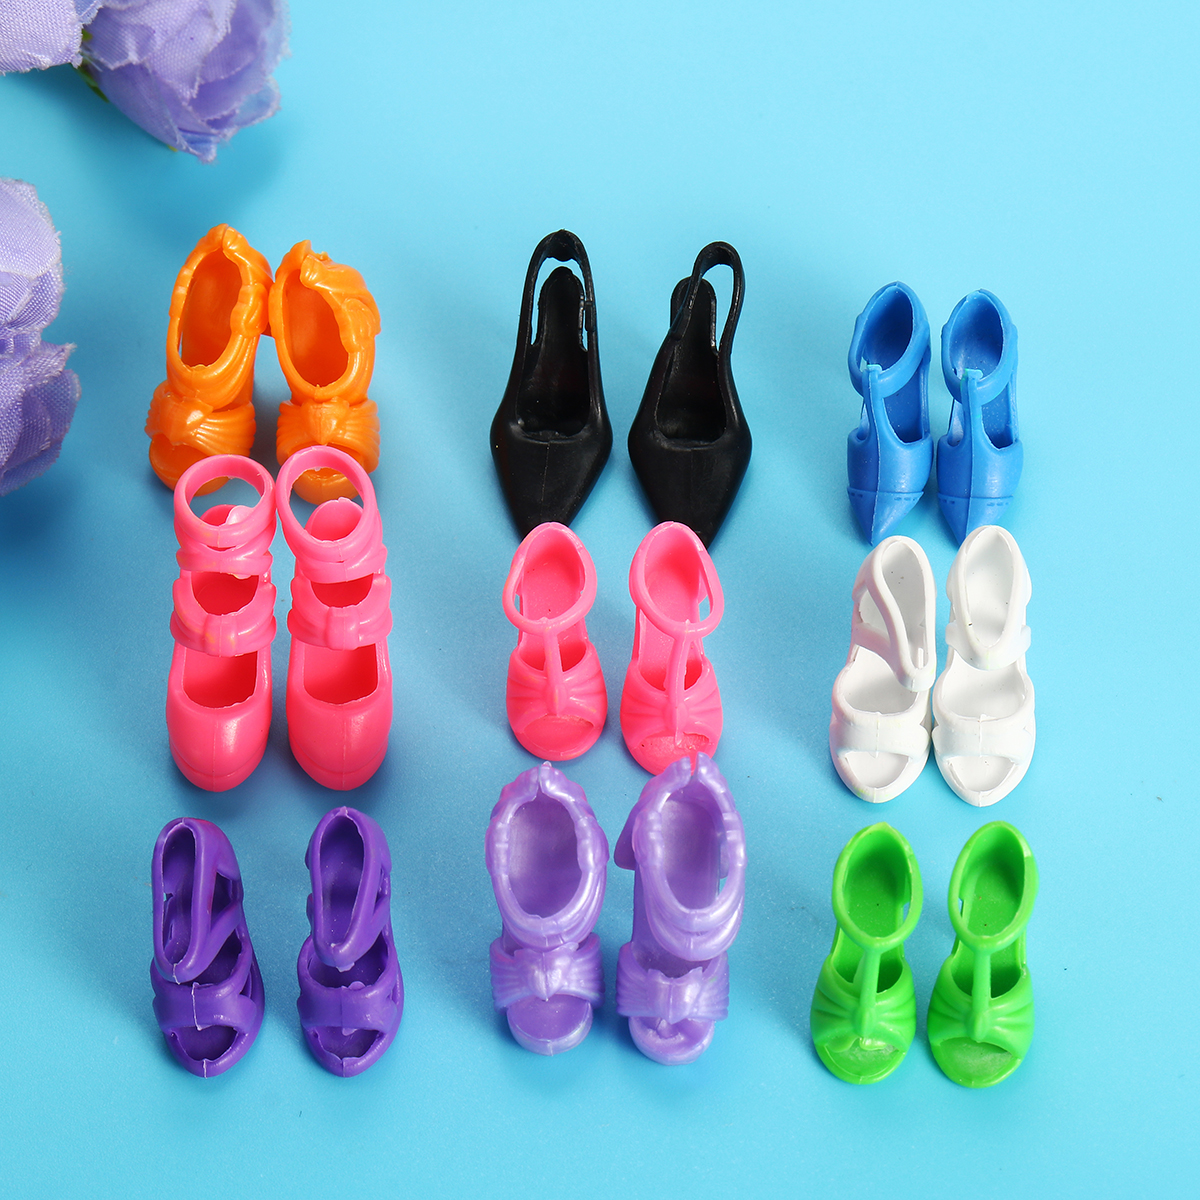 Set of 40 Pairs Fashion Dolls Shoes Heels Sandals For Dolls Outfit Dress